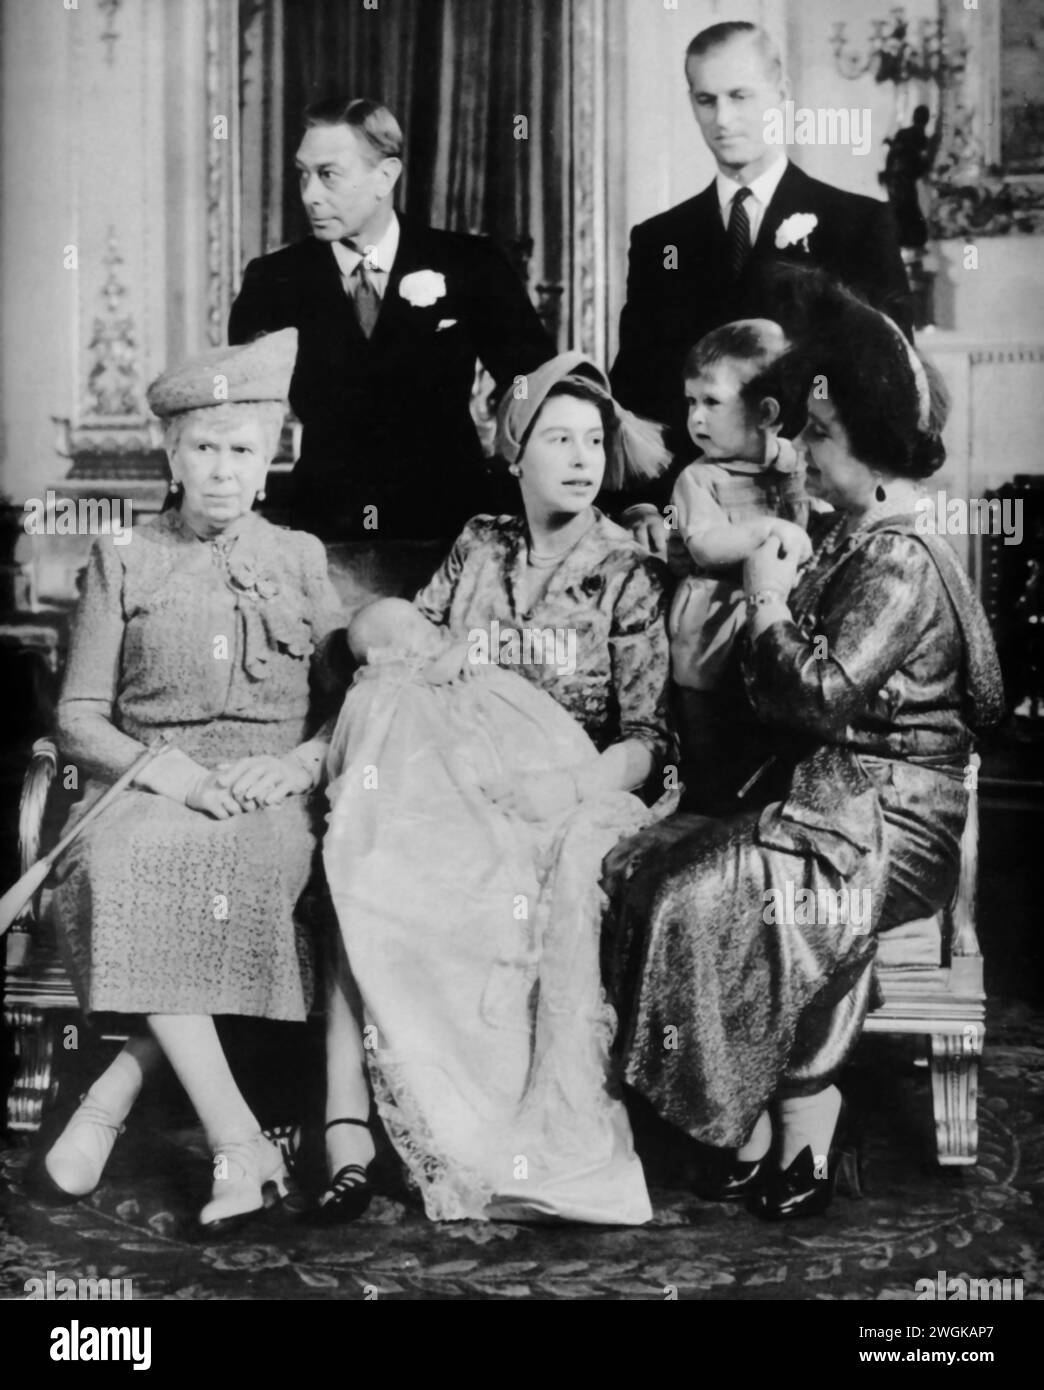 A portrait featuring Elizabeth II, Prince Philip, King George VI, Elizabeth I (the Queen Mother), Queen Mary, and newborn, Princess Anne. Taken during the time of Princess Anne's christening in 1950, brings together multiple generations of British royalty. The photograph captures a historic moment, of the royal lineage with Queen Mary, the reigning King George VI, and the future monarchs Elizabeth II and Princess Anne. Stock Photo